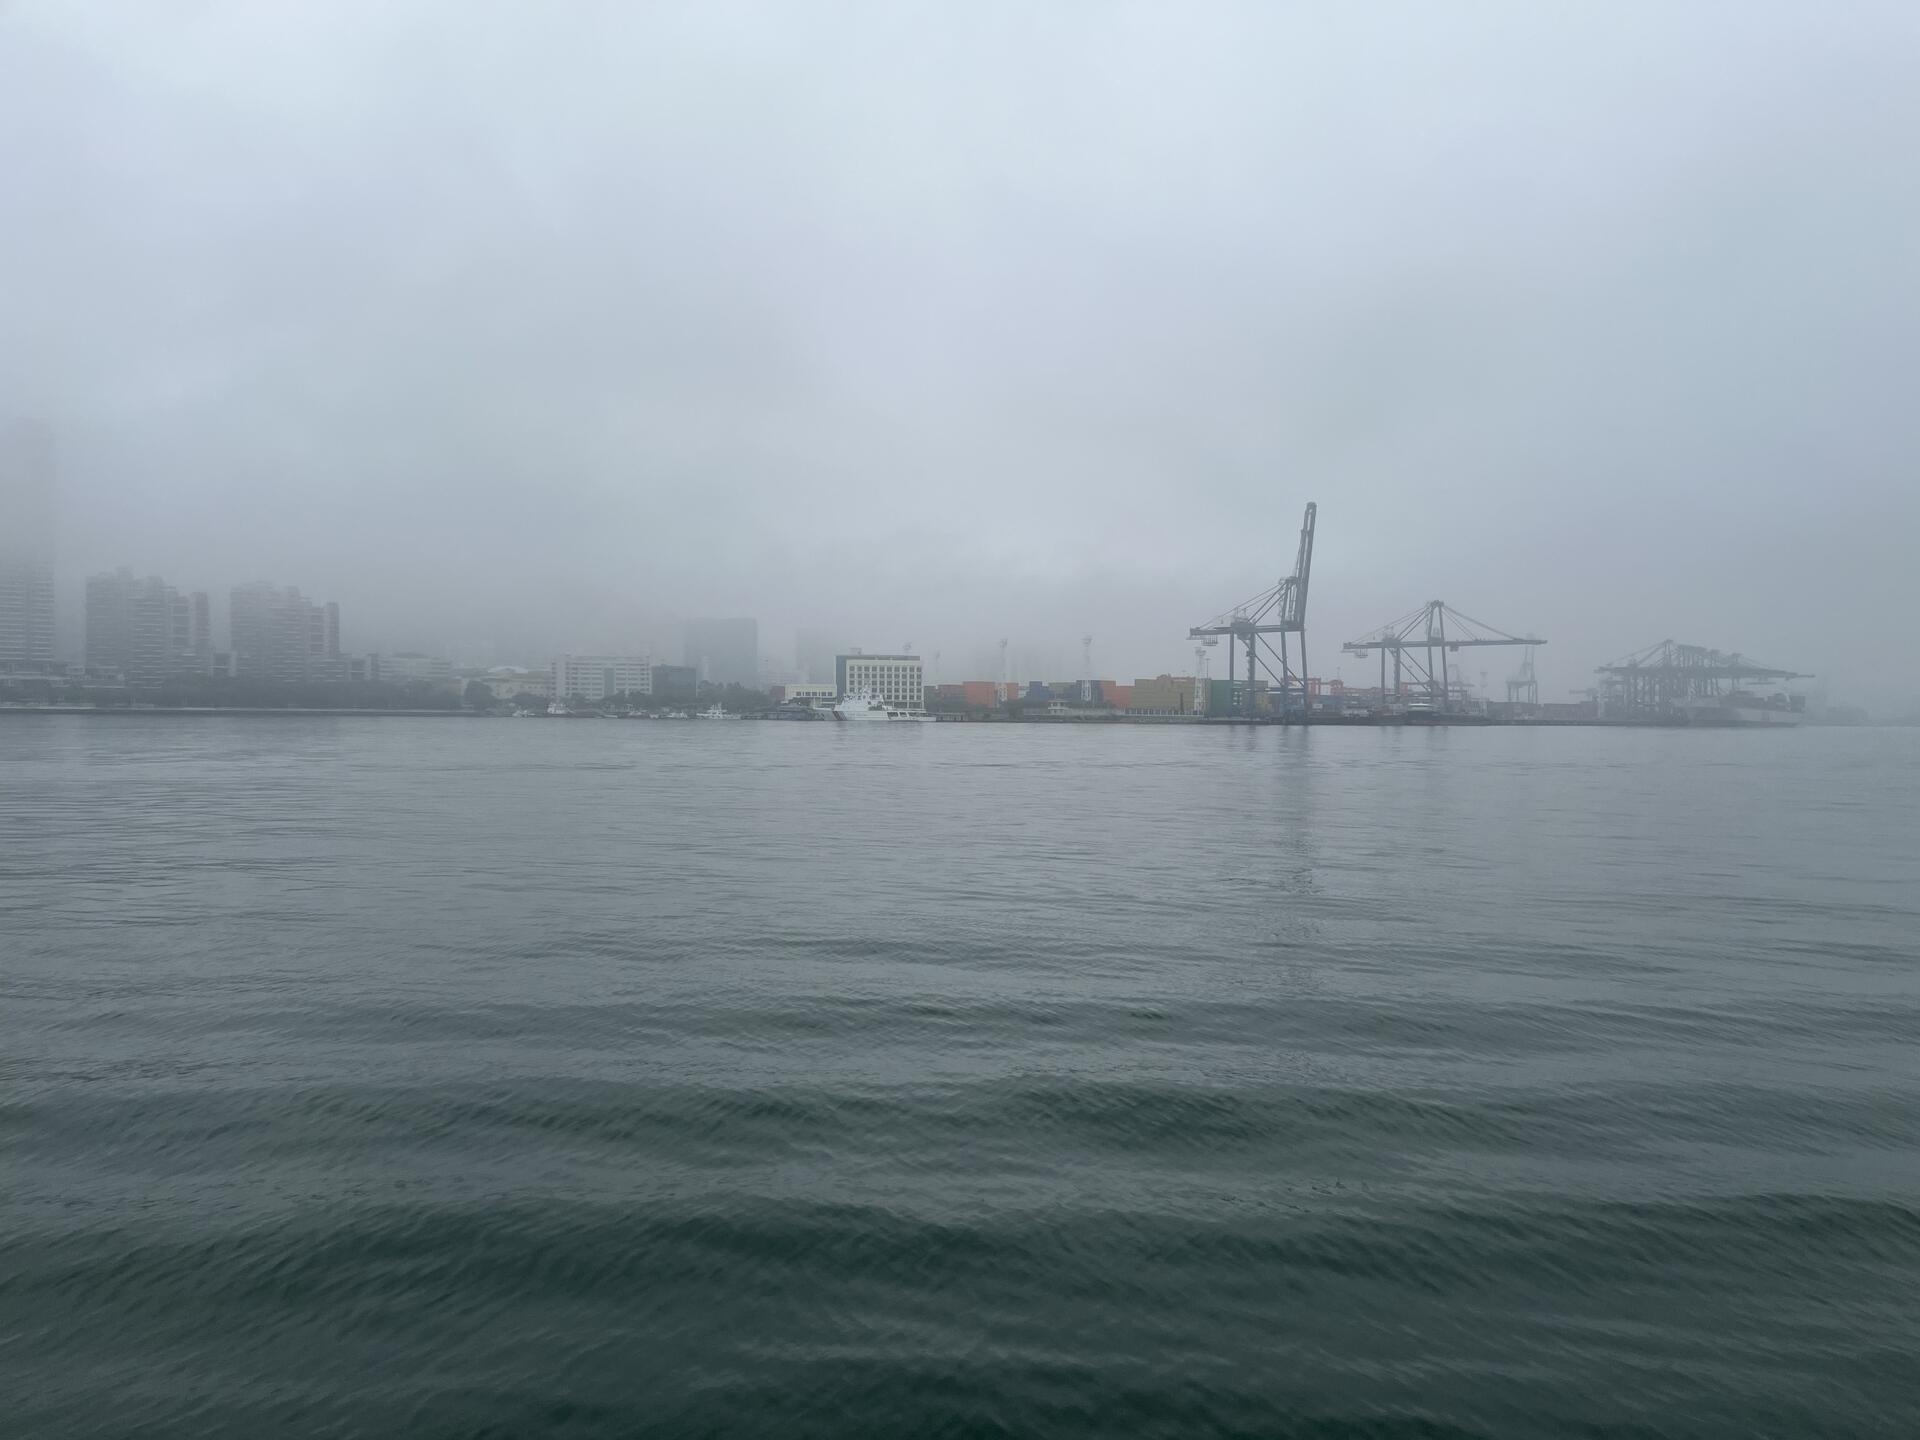 Yantian Port as seen from the boat